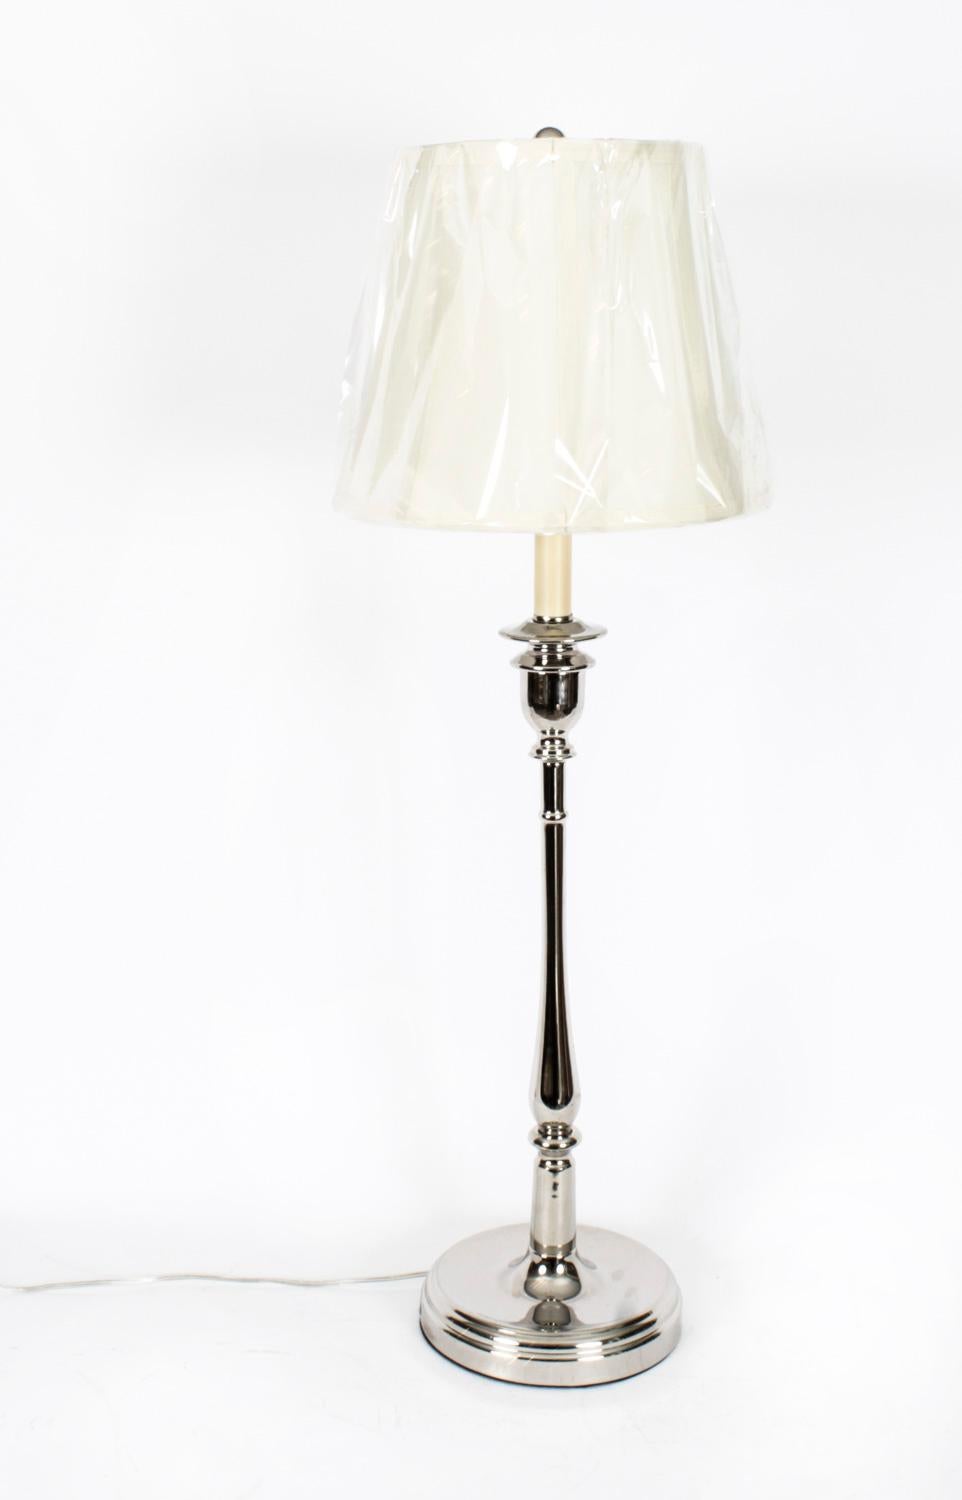 This is a highly attractive and stylish pair of Ralph Lauren chrome table lamps, late 20th Century in date.
 
This splendid pair is crafted from polished nickel and mounted on a circular base.
 
The craftsmanship is second to none throughout all